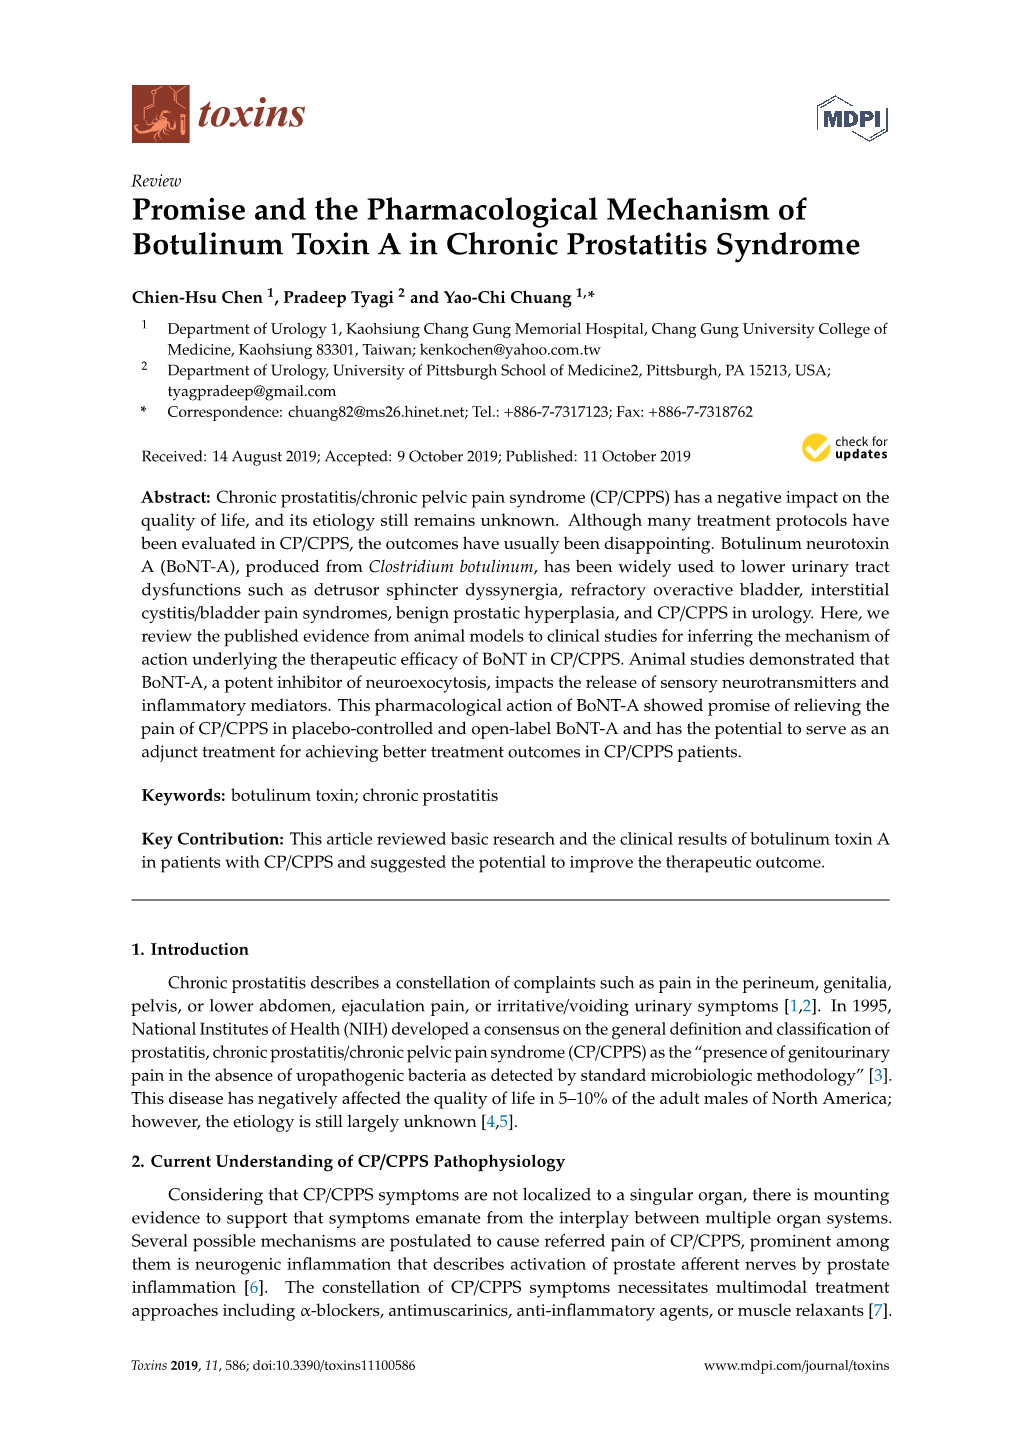 Promise and the Pharmacological Mechanism of Botulinum Toxin a in Chronic Prostatitis Syndrome